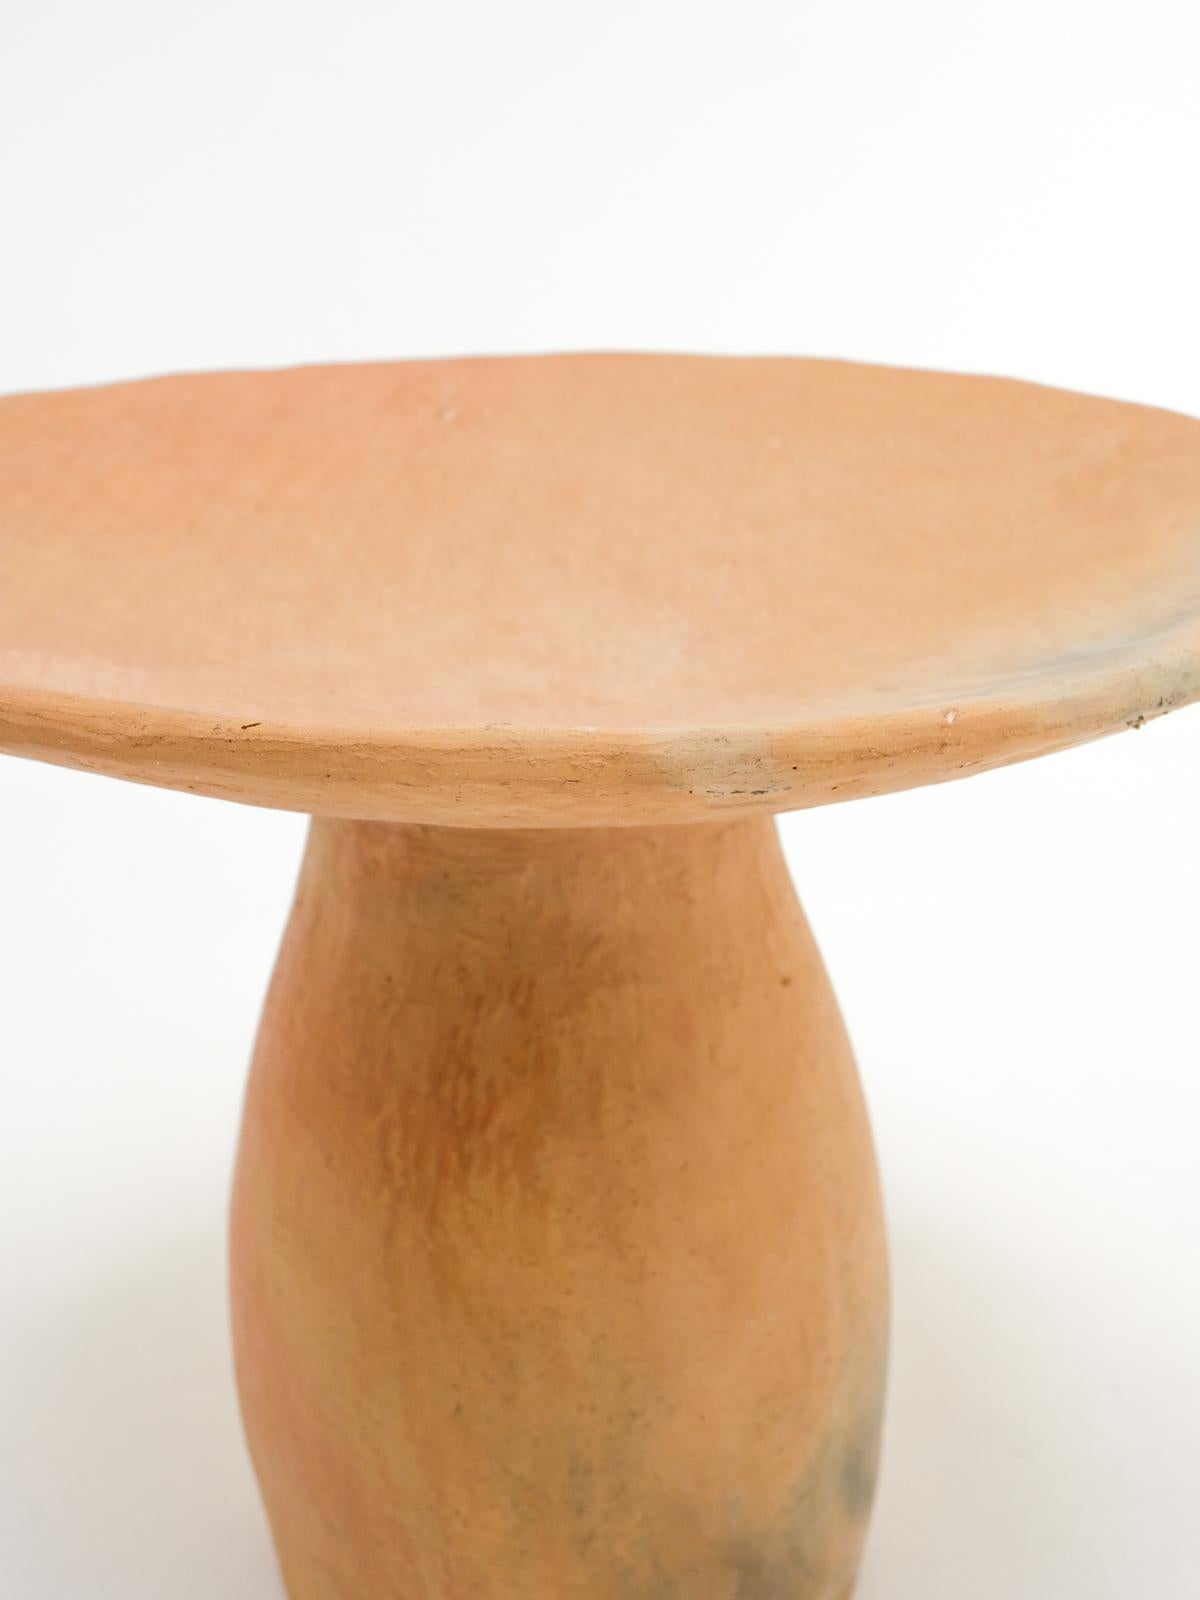 Terracotta contemporary Side Table Made of Clay, Handcrafted by the Potter Houda For Sale 4